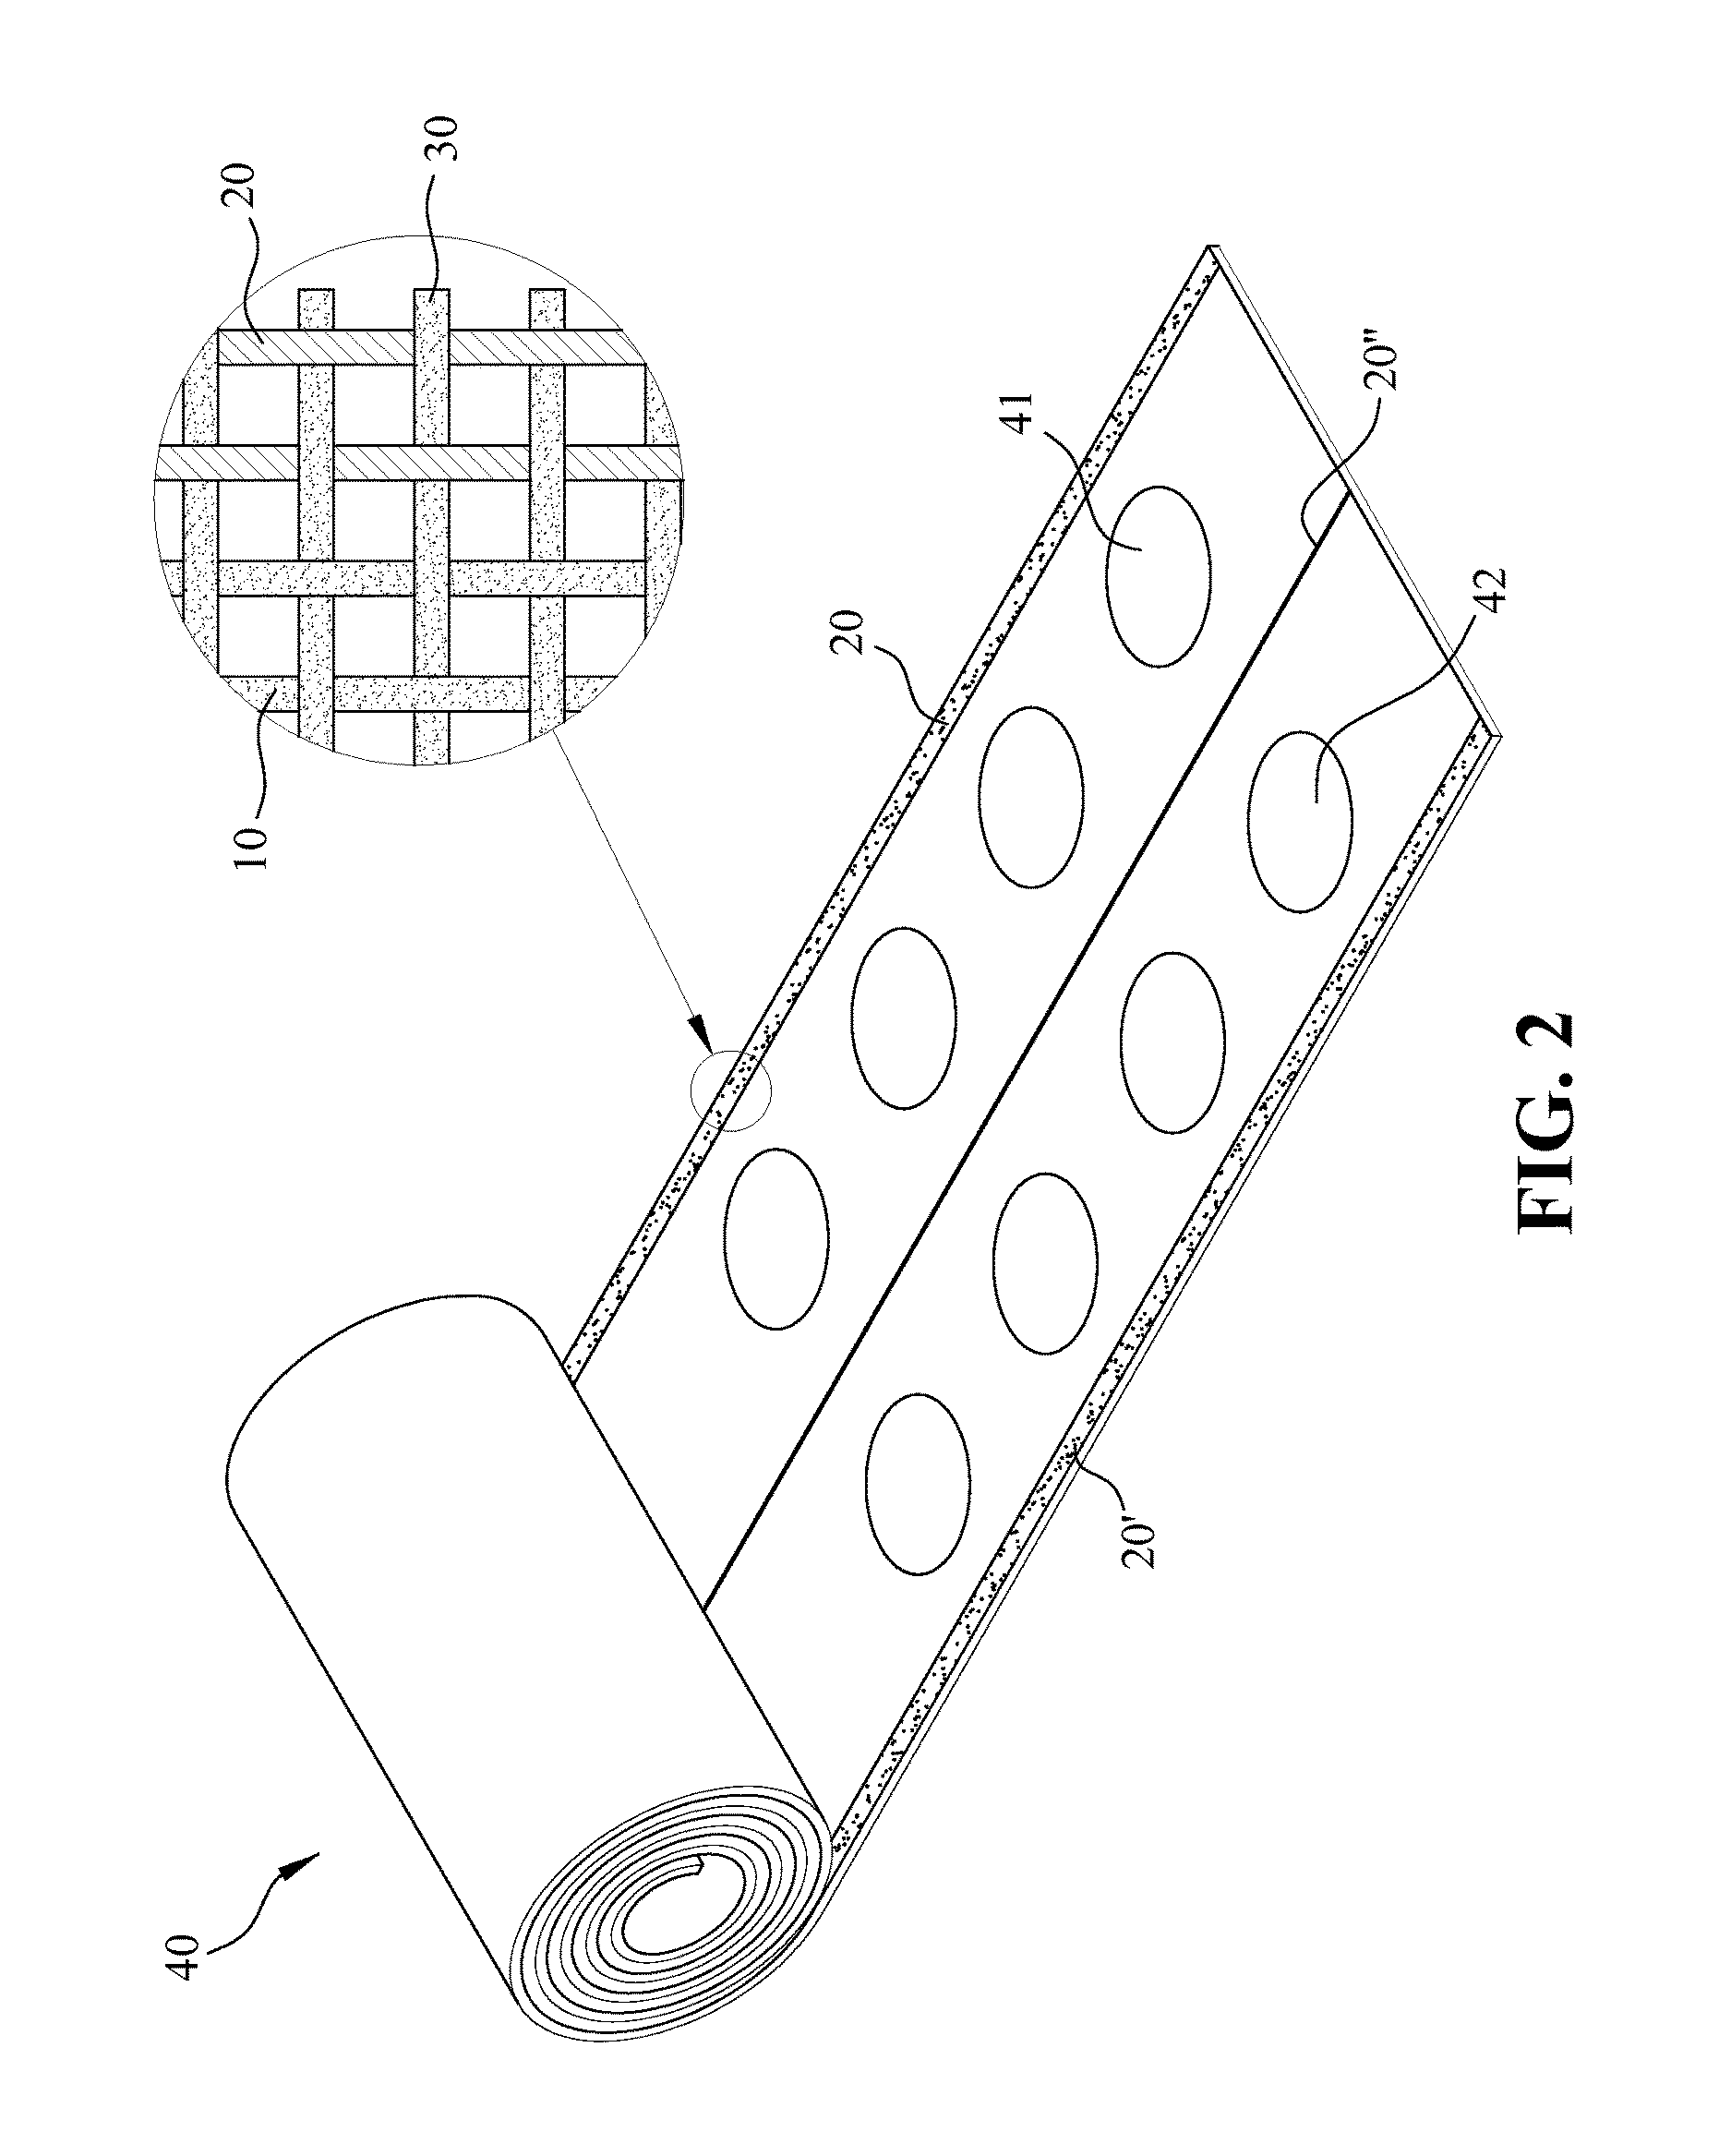 Speaker diaphragm fabric and manufacturing method thereof